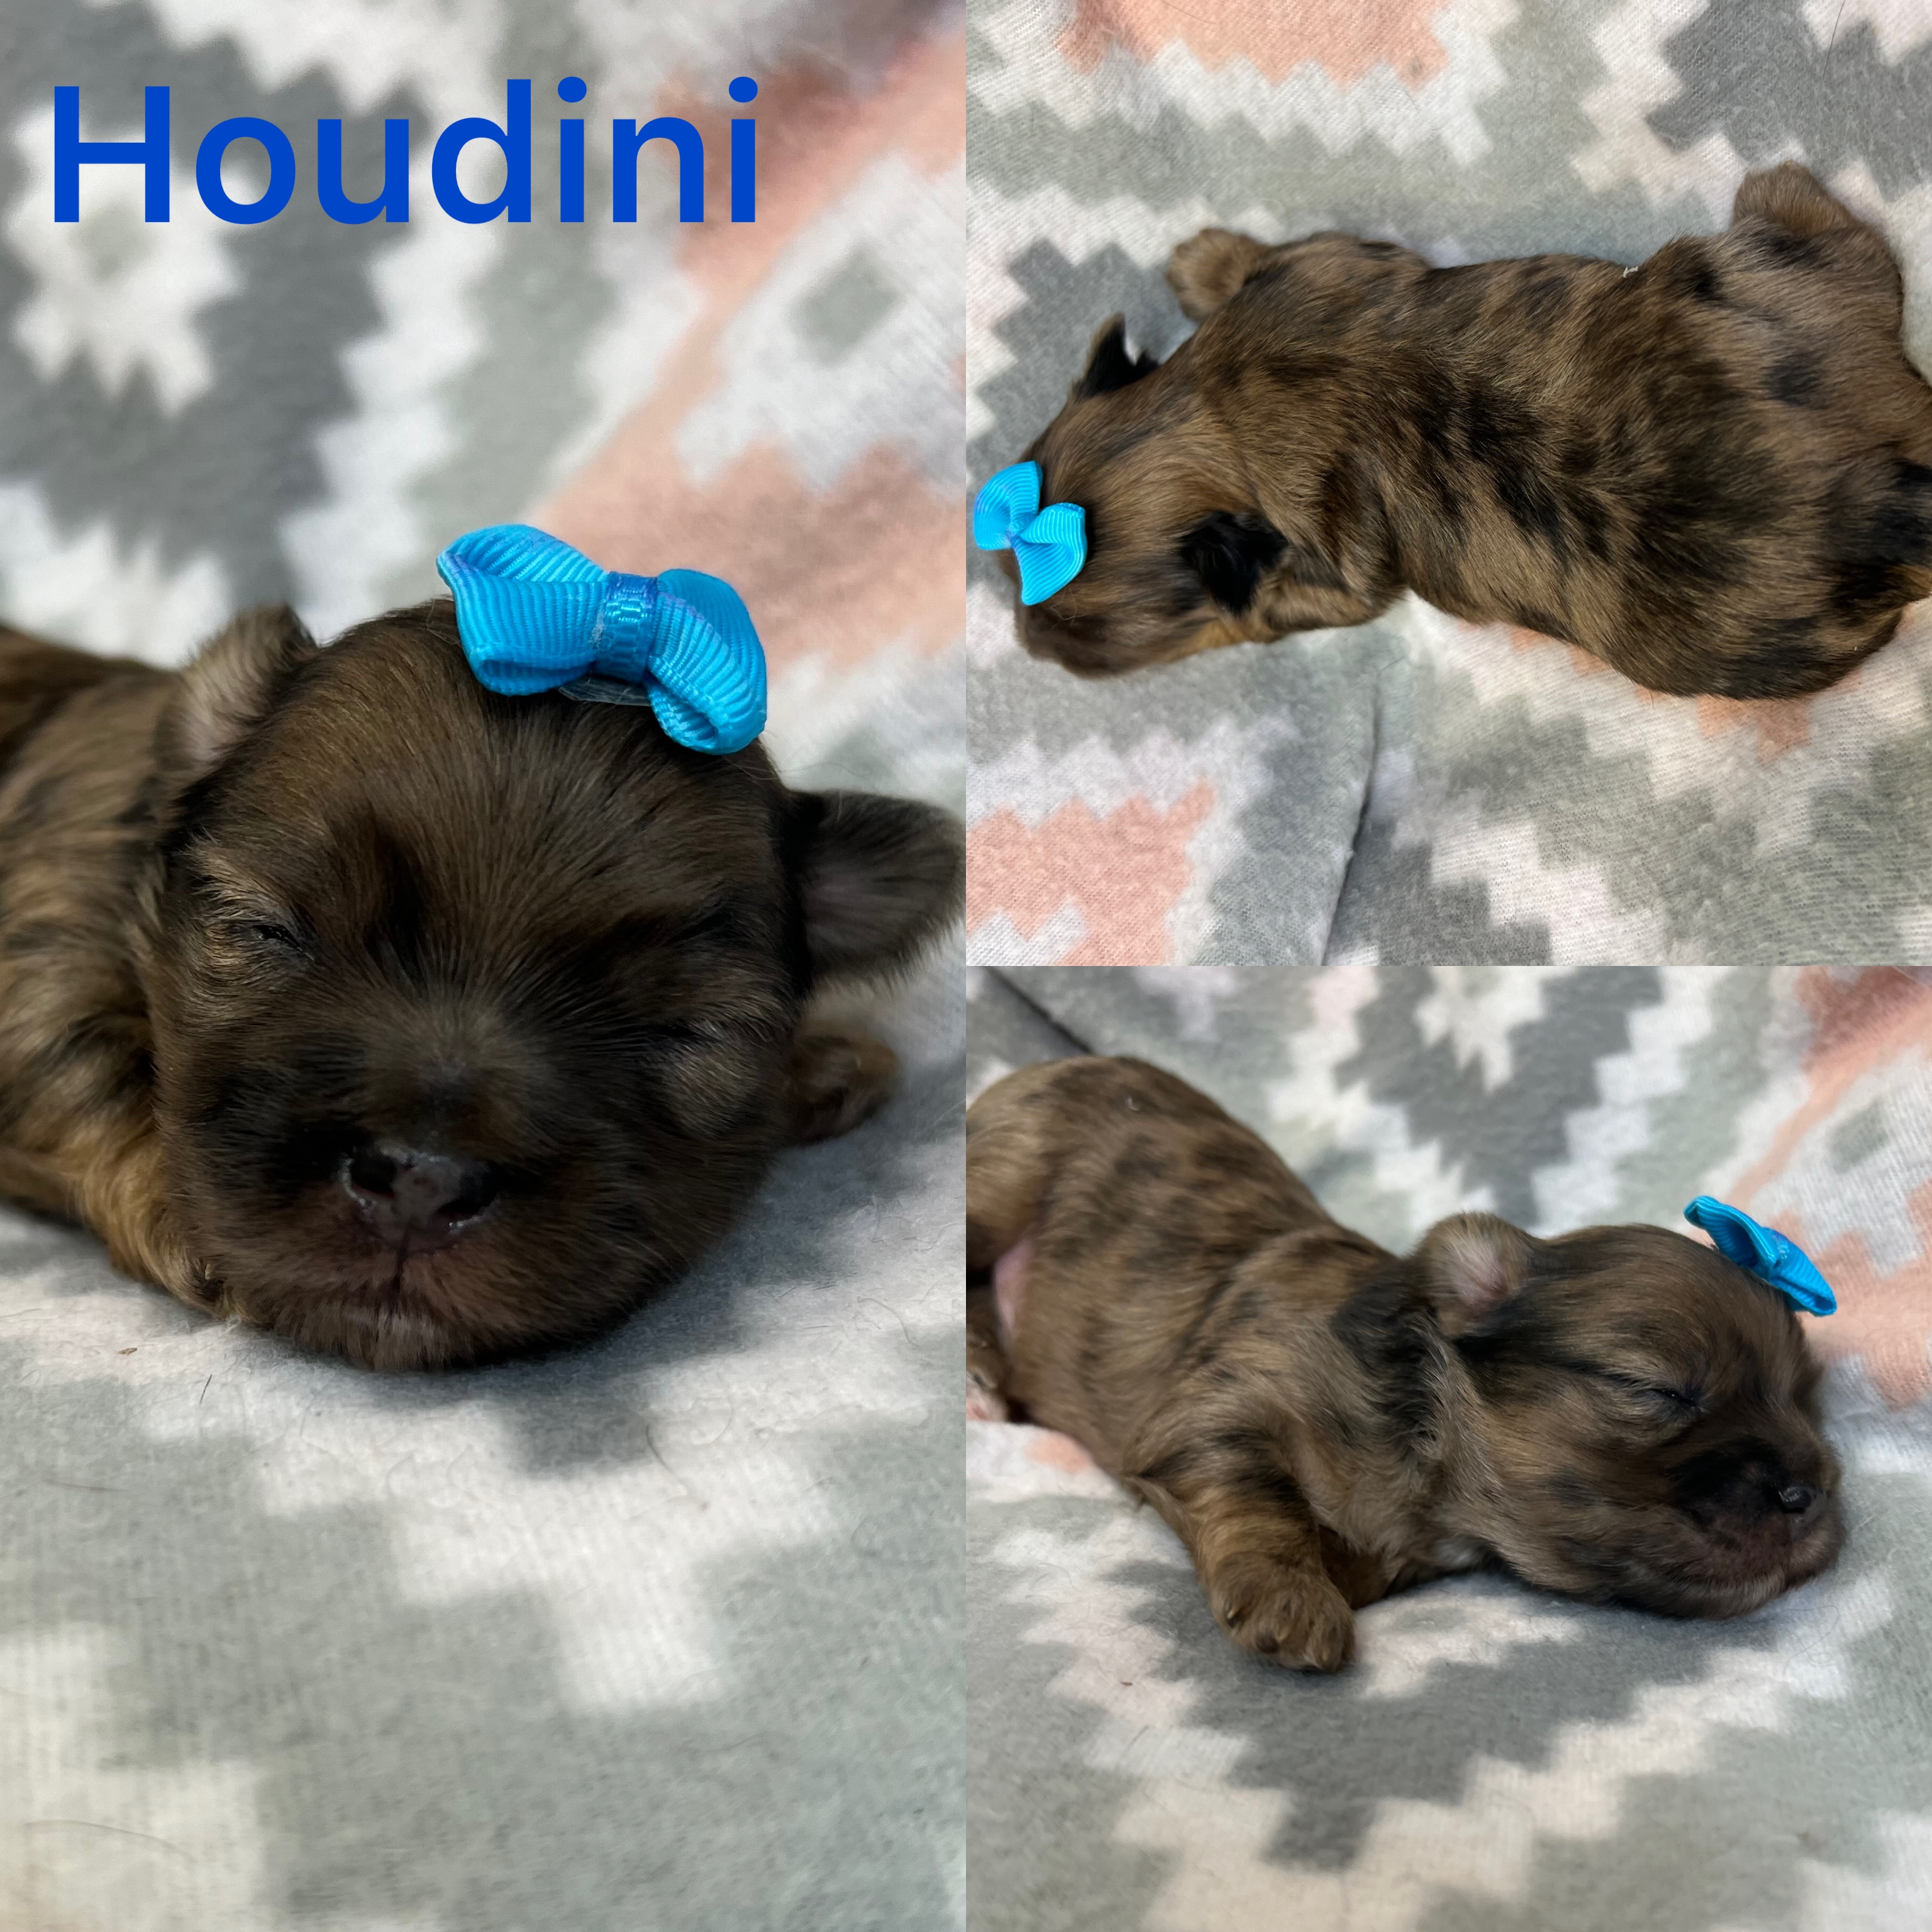 Houdini is ADOPTED